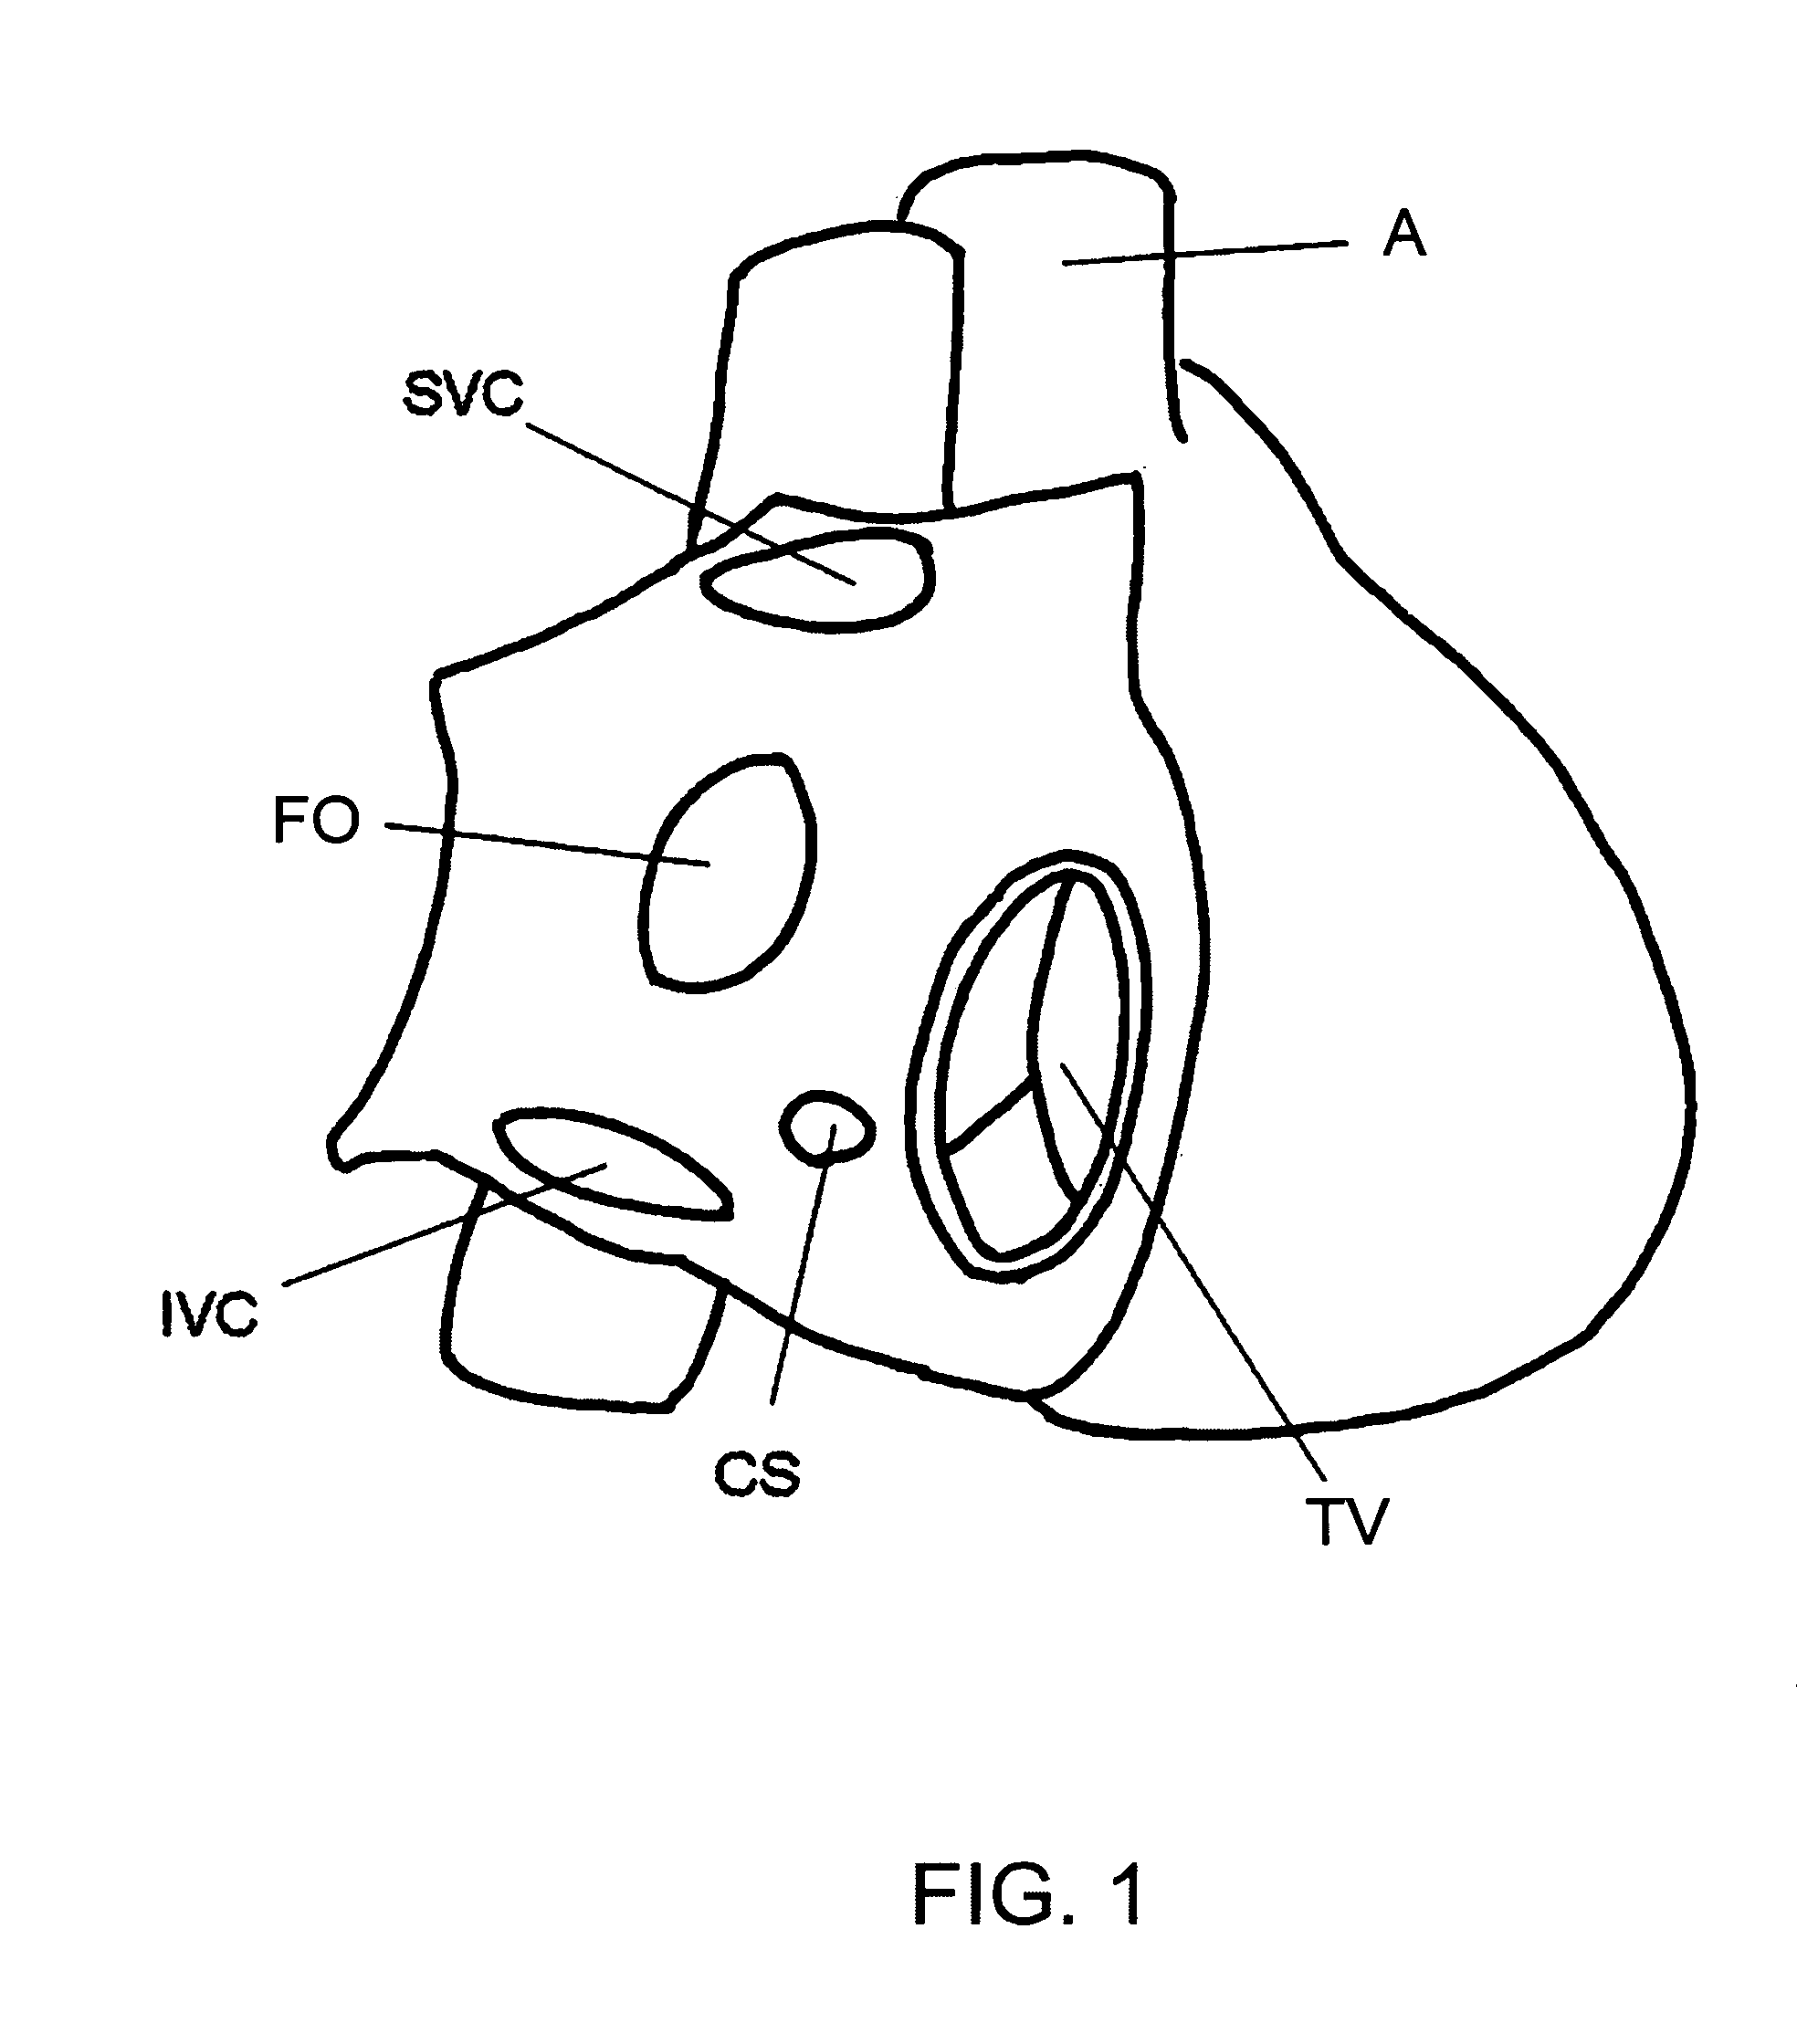 Methods and devices for image-guided manipulation or sensing of anatomic structures